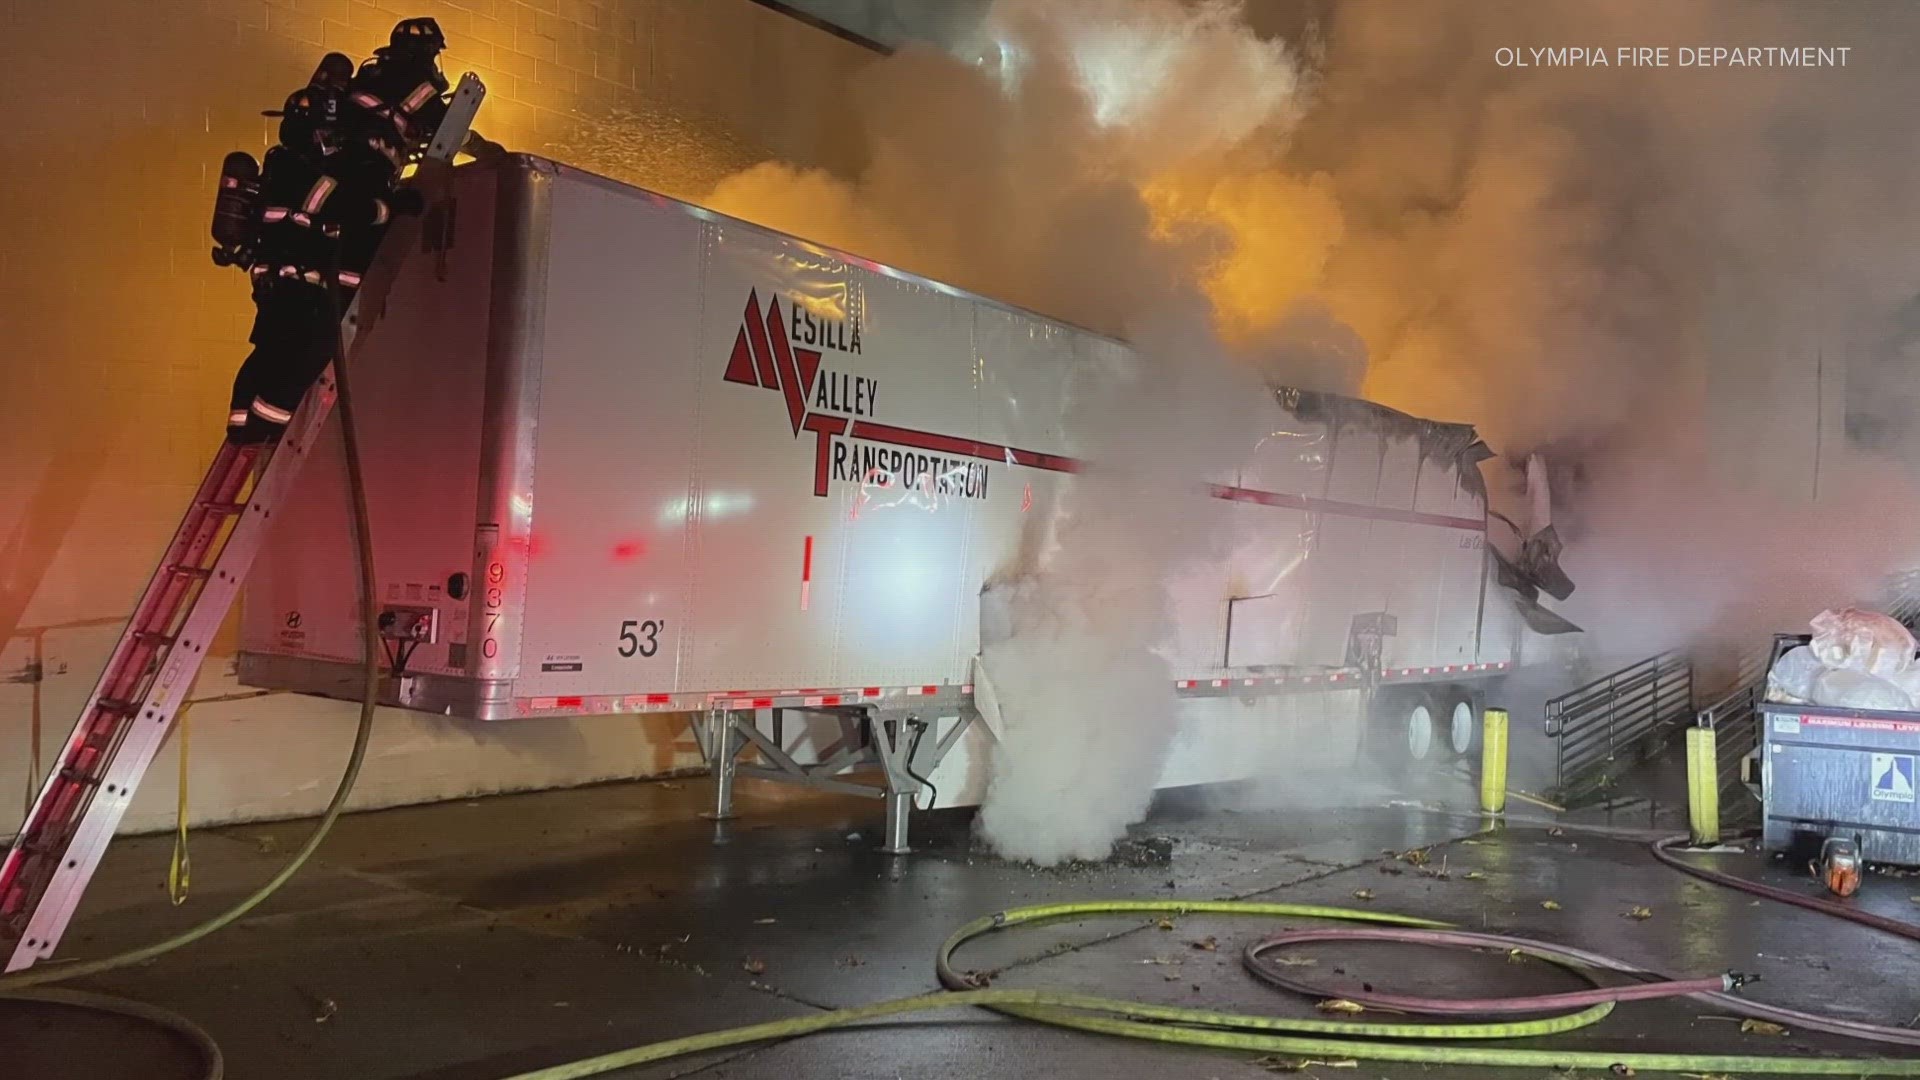 Fire crews are still looking into what caused a semi-trailer to catch fire near a Home Goods store in Olympia early Friday morning